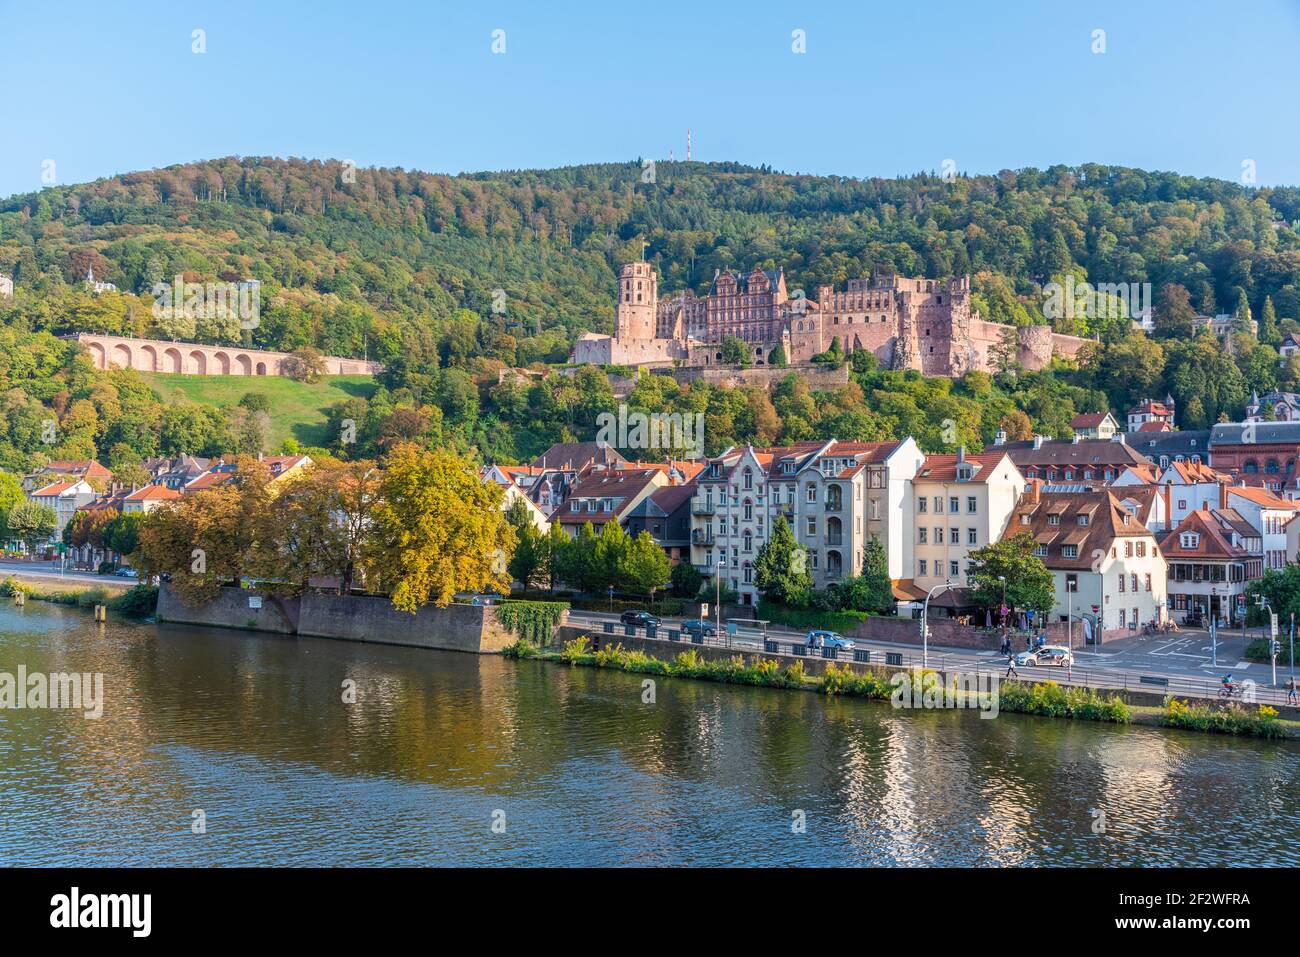 View of the Heidelberg castle in Germany Stock Photo